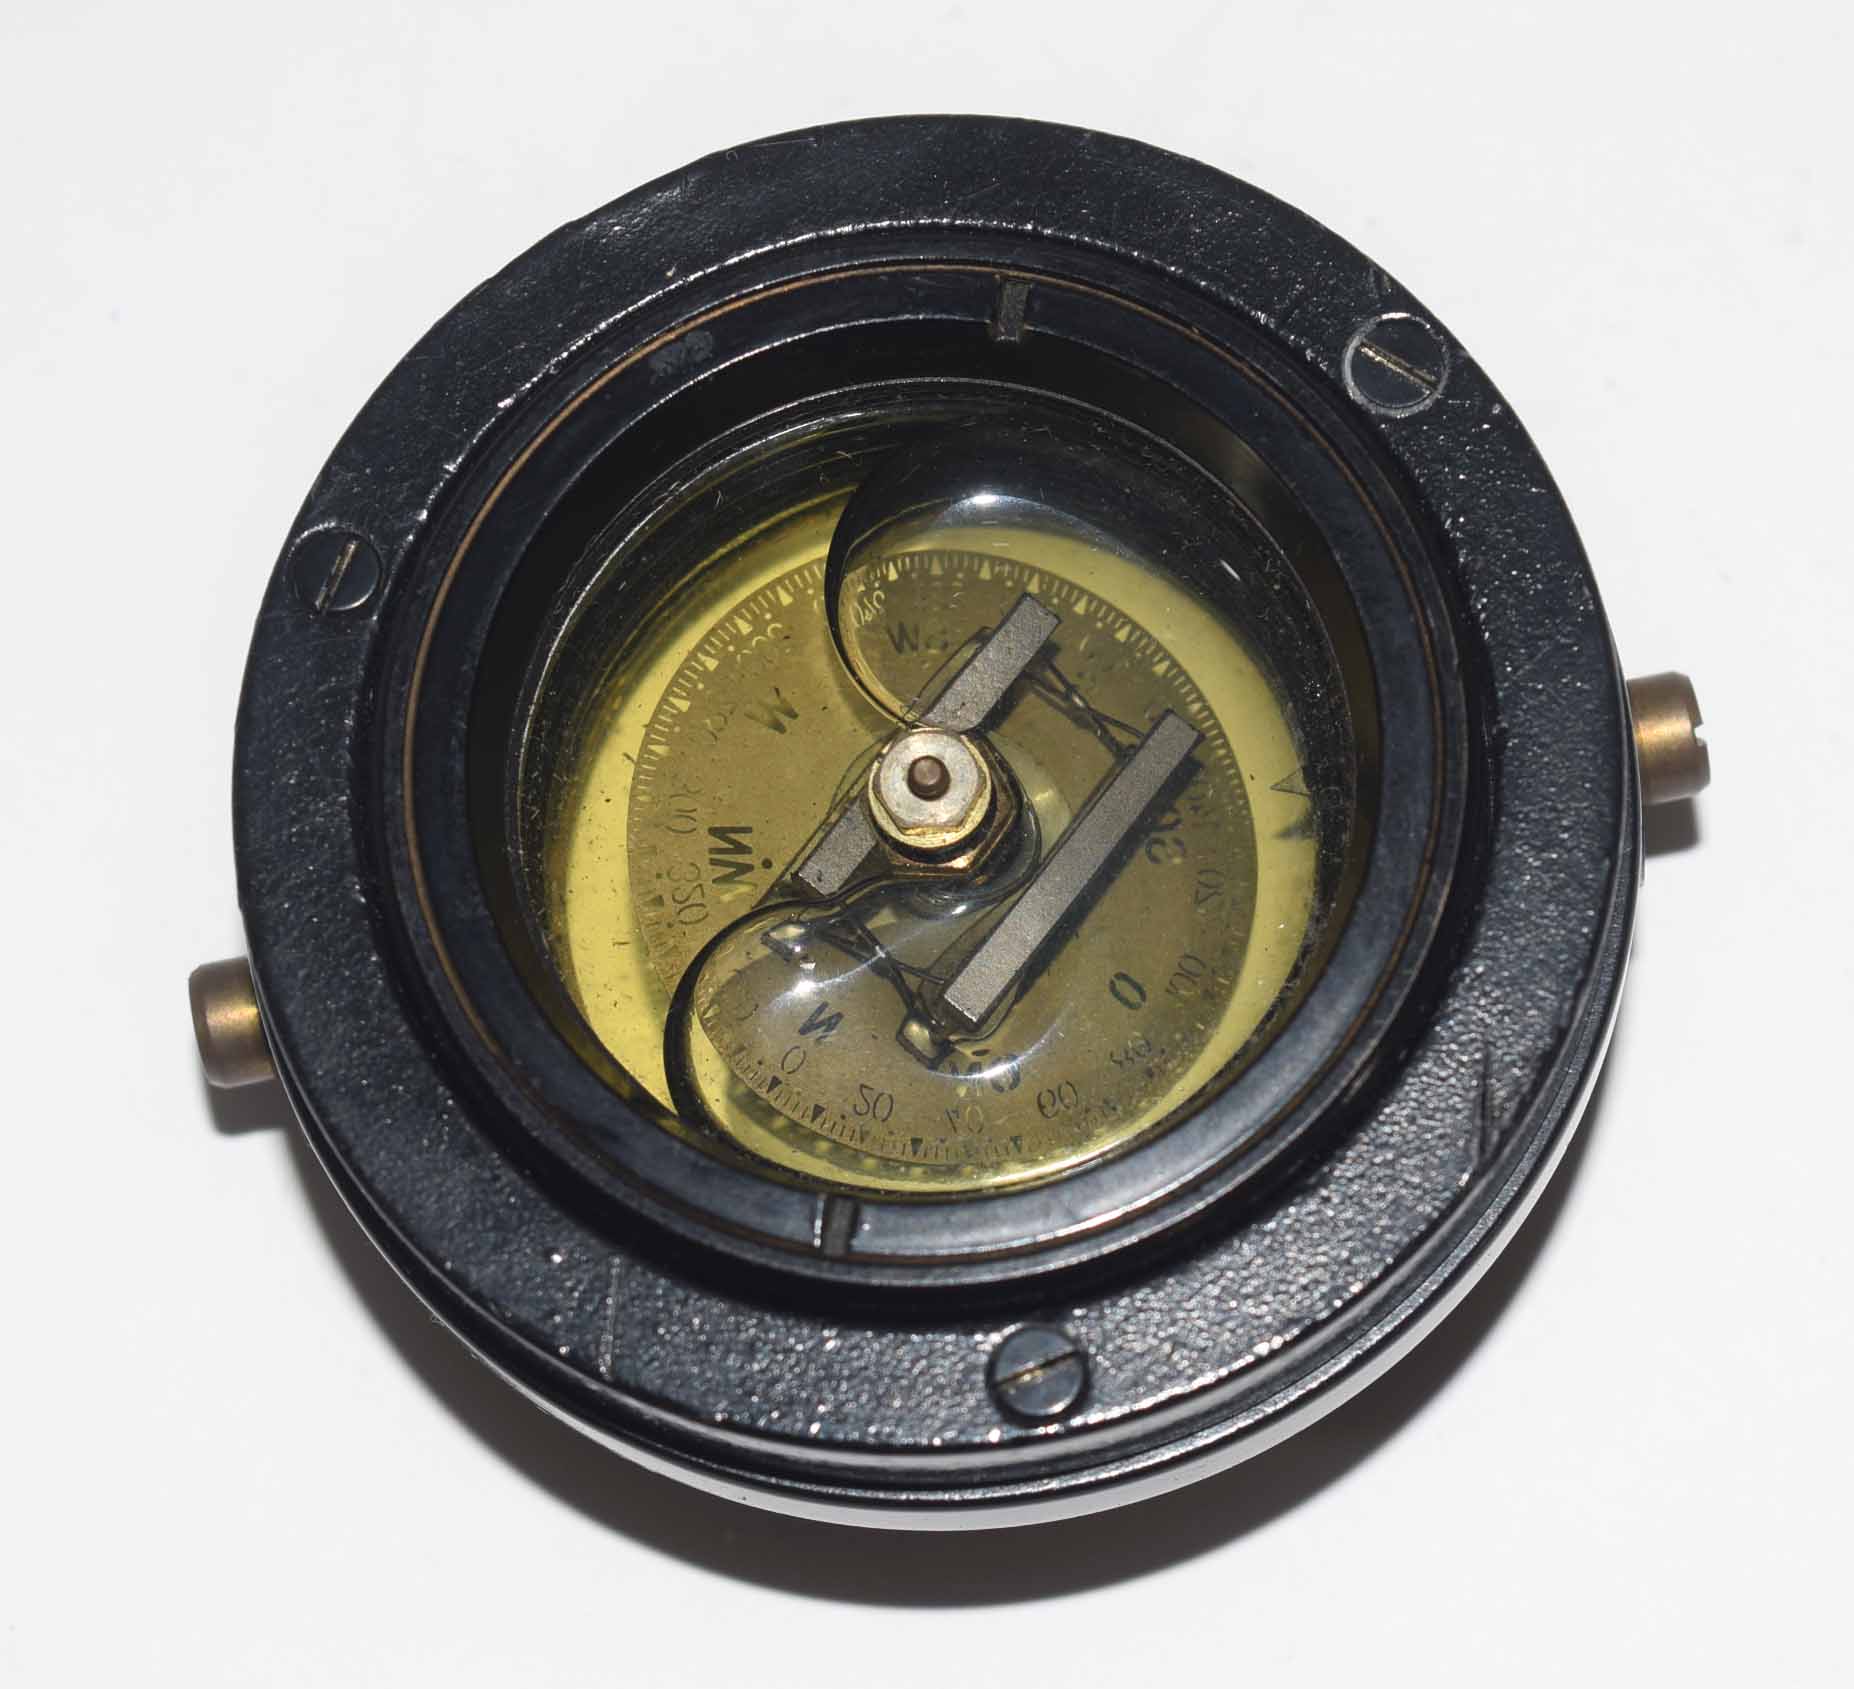 WWII Third Reich German Naval compass, Waffen No 366150 Model 359 dated 16th June 1944 with - Image 6 of 7